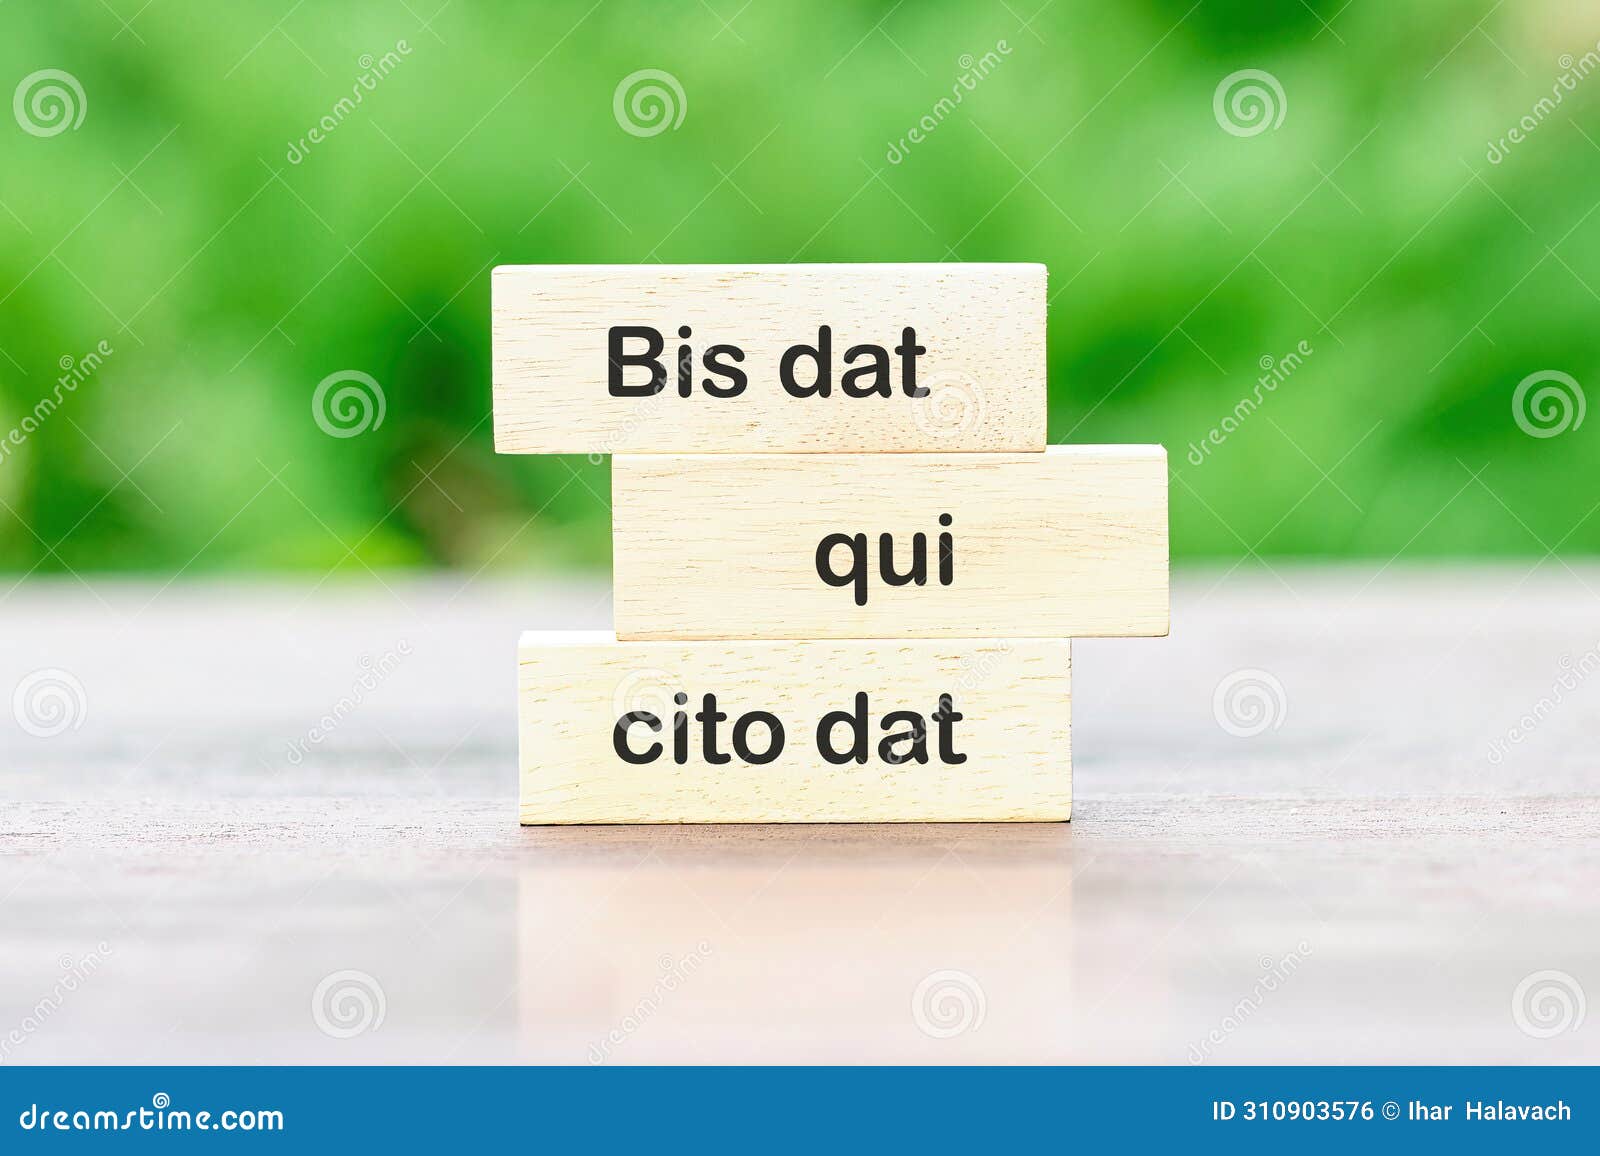 bis dat qui cito dat it is translated from latin as the one who gives twice is the one who gives quickly written on wooden blocks